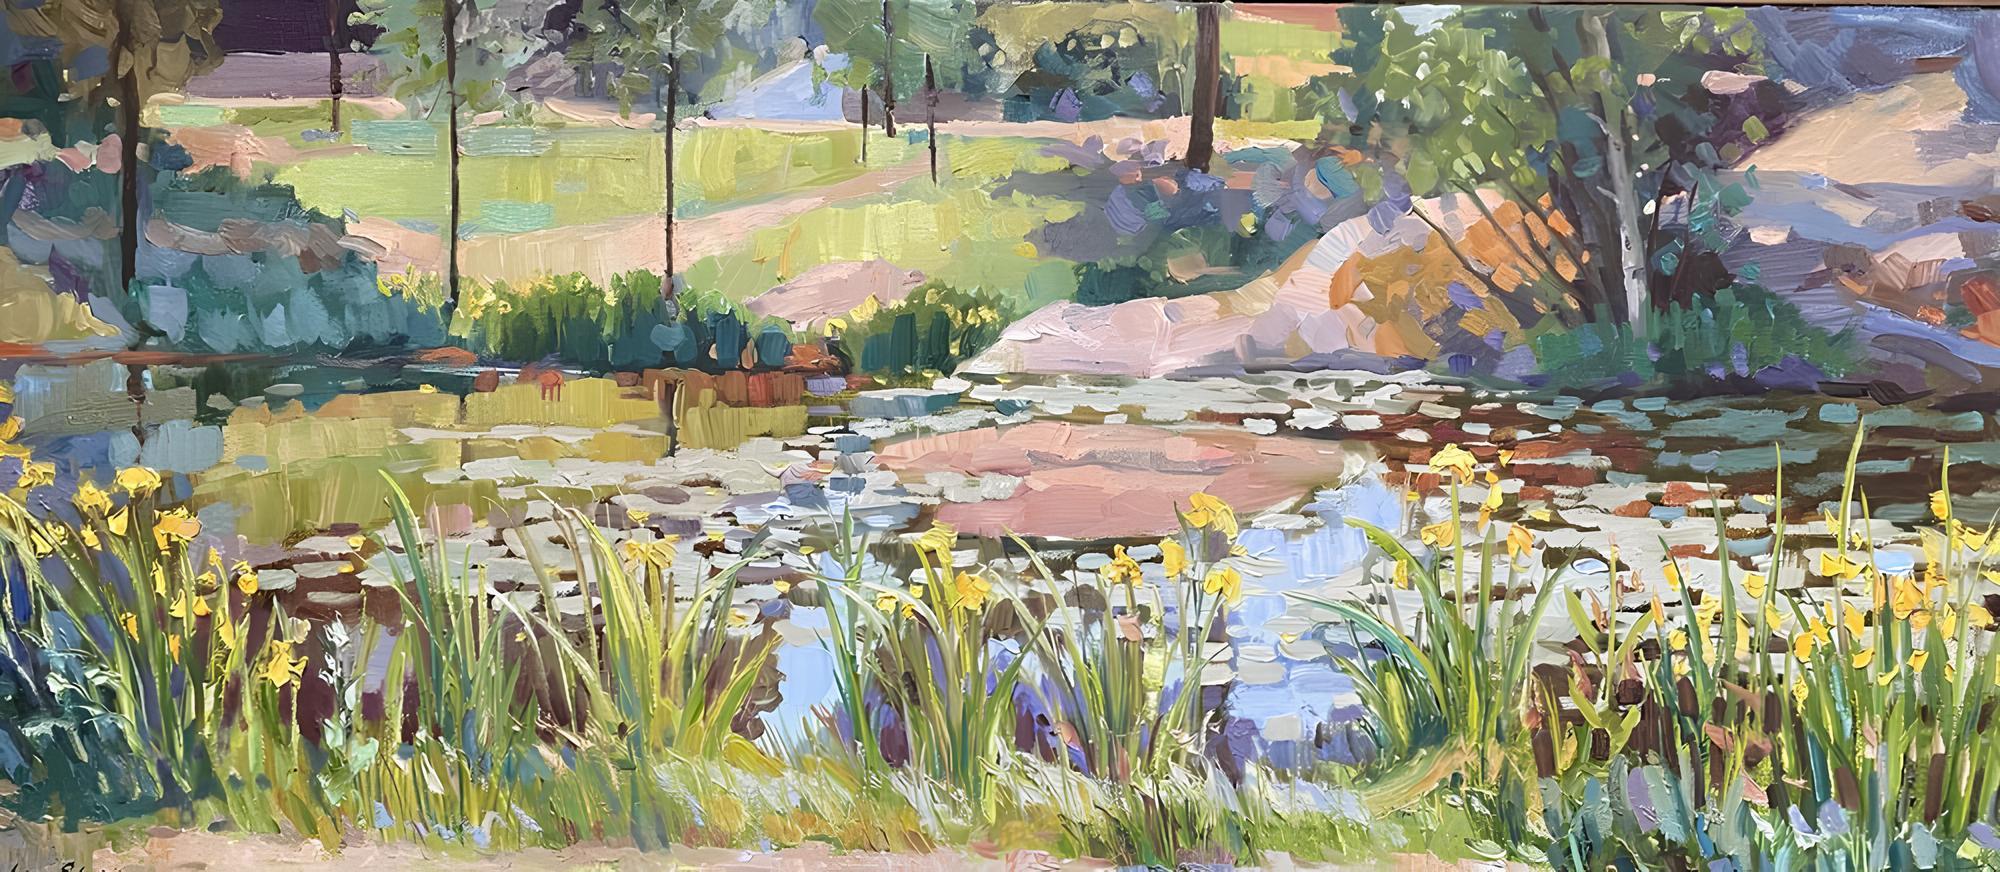 Nadezda Stupina Landscape Painting - A pond with water lilies and irises 2